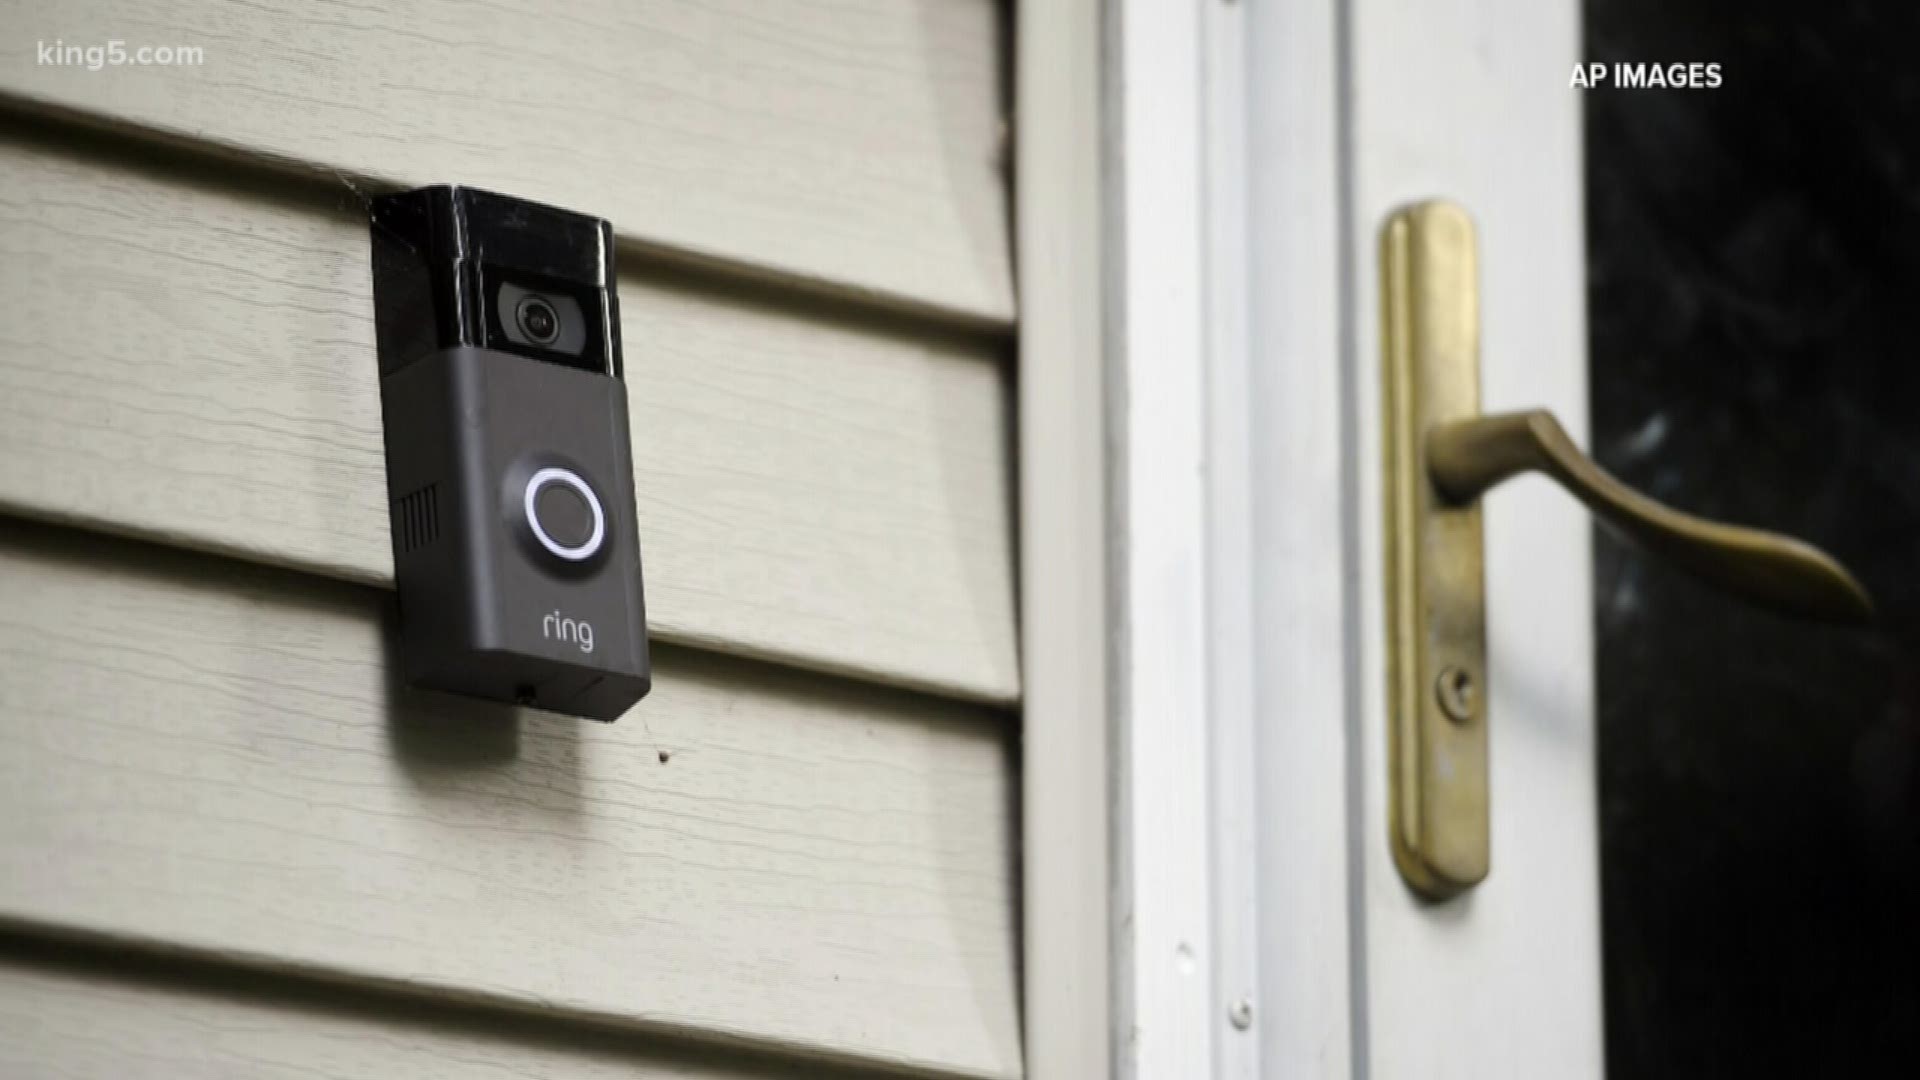 Amazon says it has considered adding facial recognition technology to its Ring doorbell cameras.